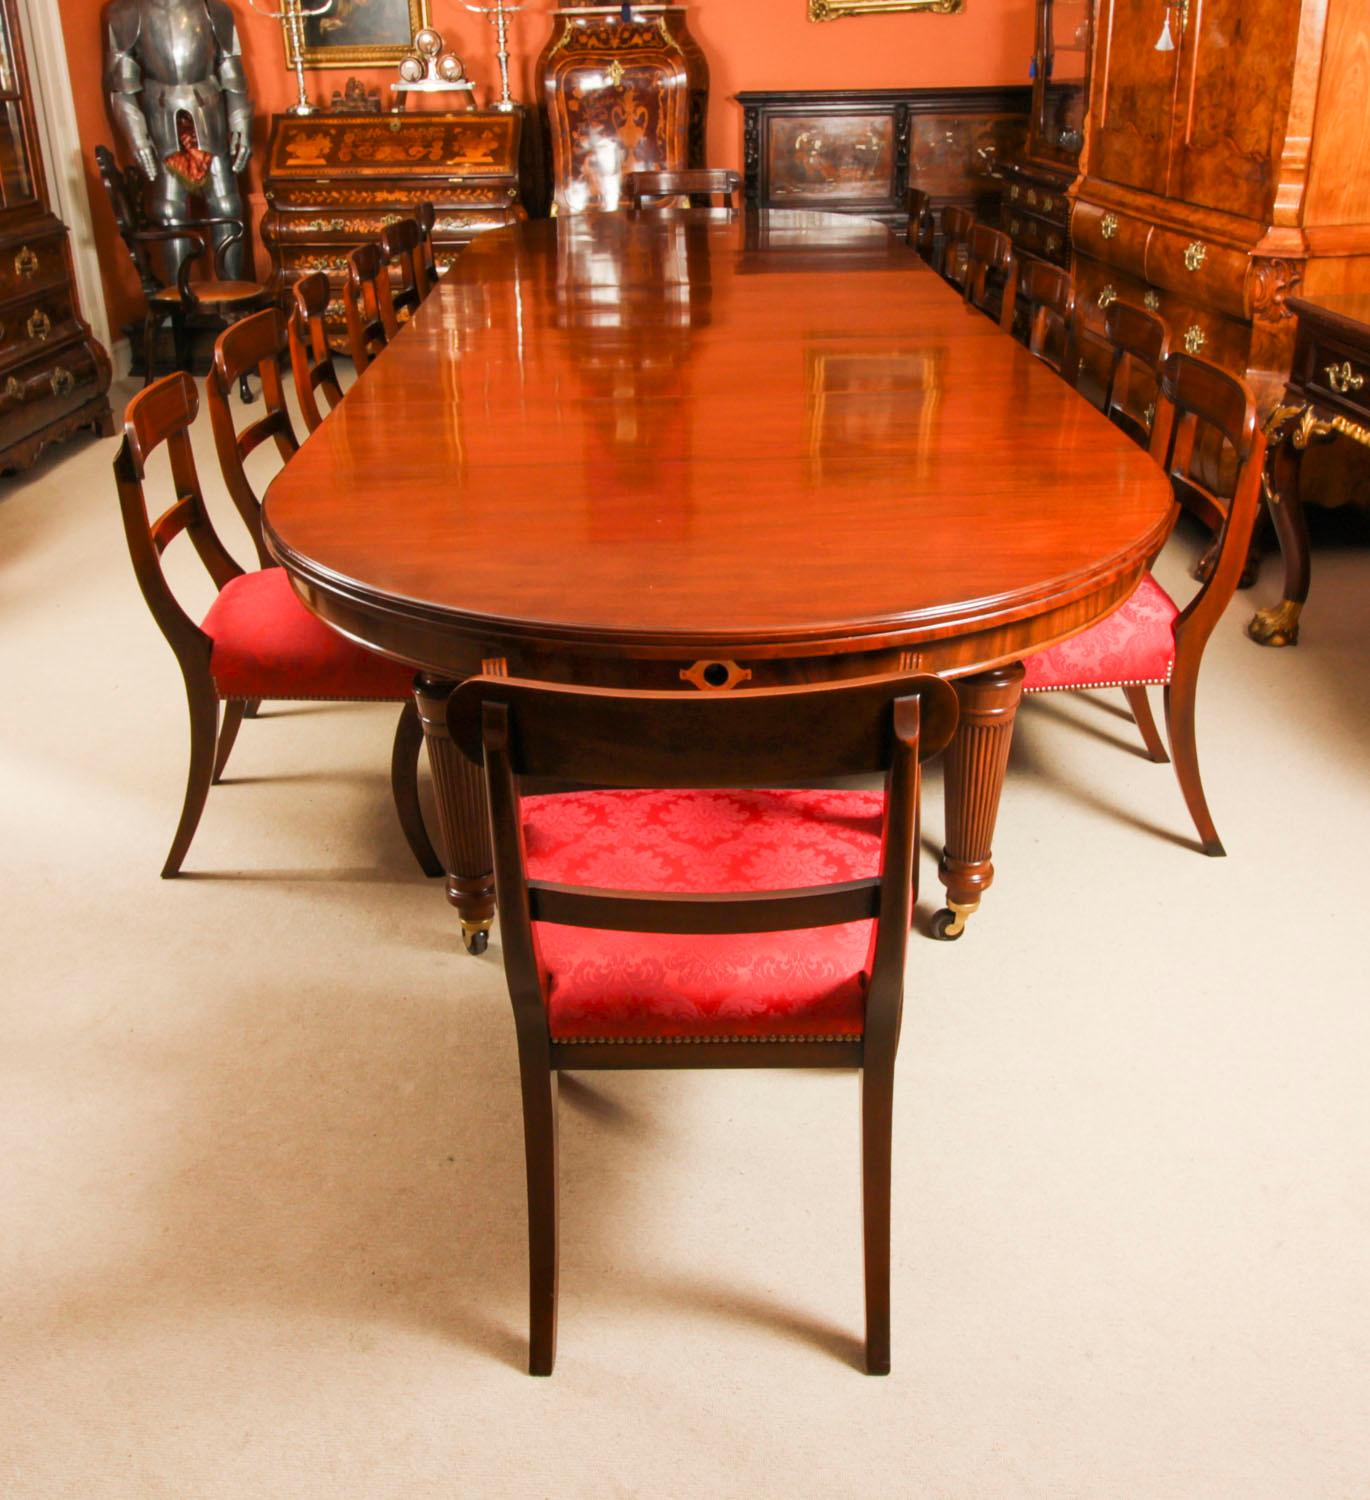 This is a beautiful dining set comprising an antique late Victorian extending dining table by the renowned Victorian cabinet makers, Edwards and Roberts, circa 1880 in date, and a set of twelve Regency Revival dining chairs.

This amazing table can